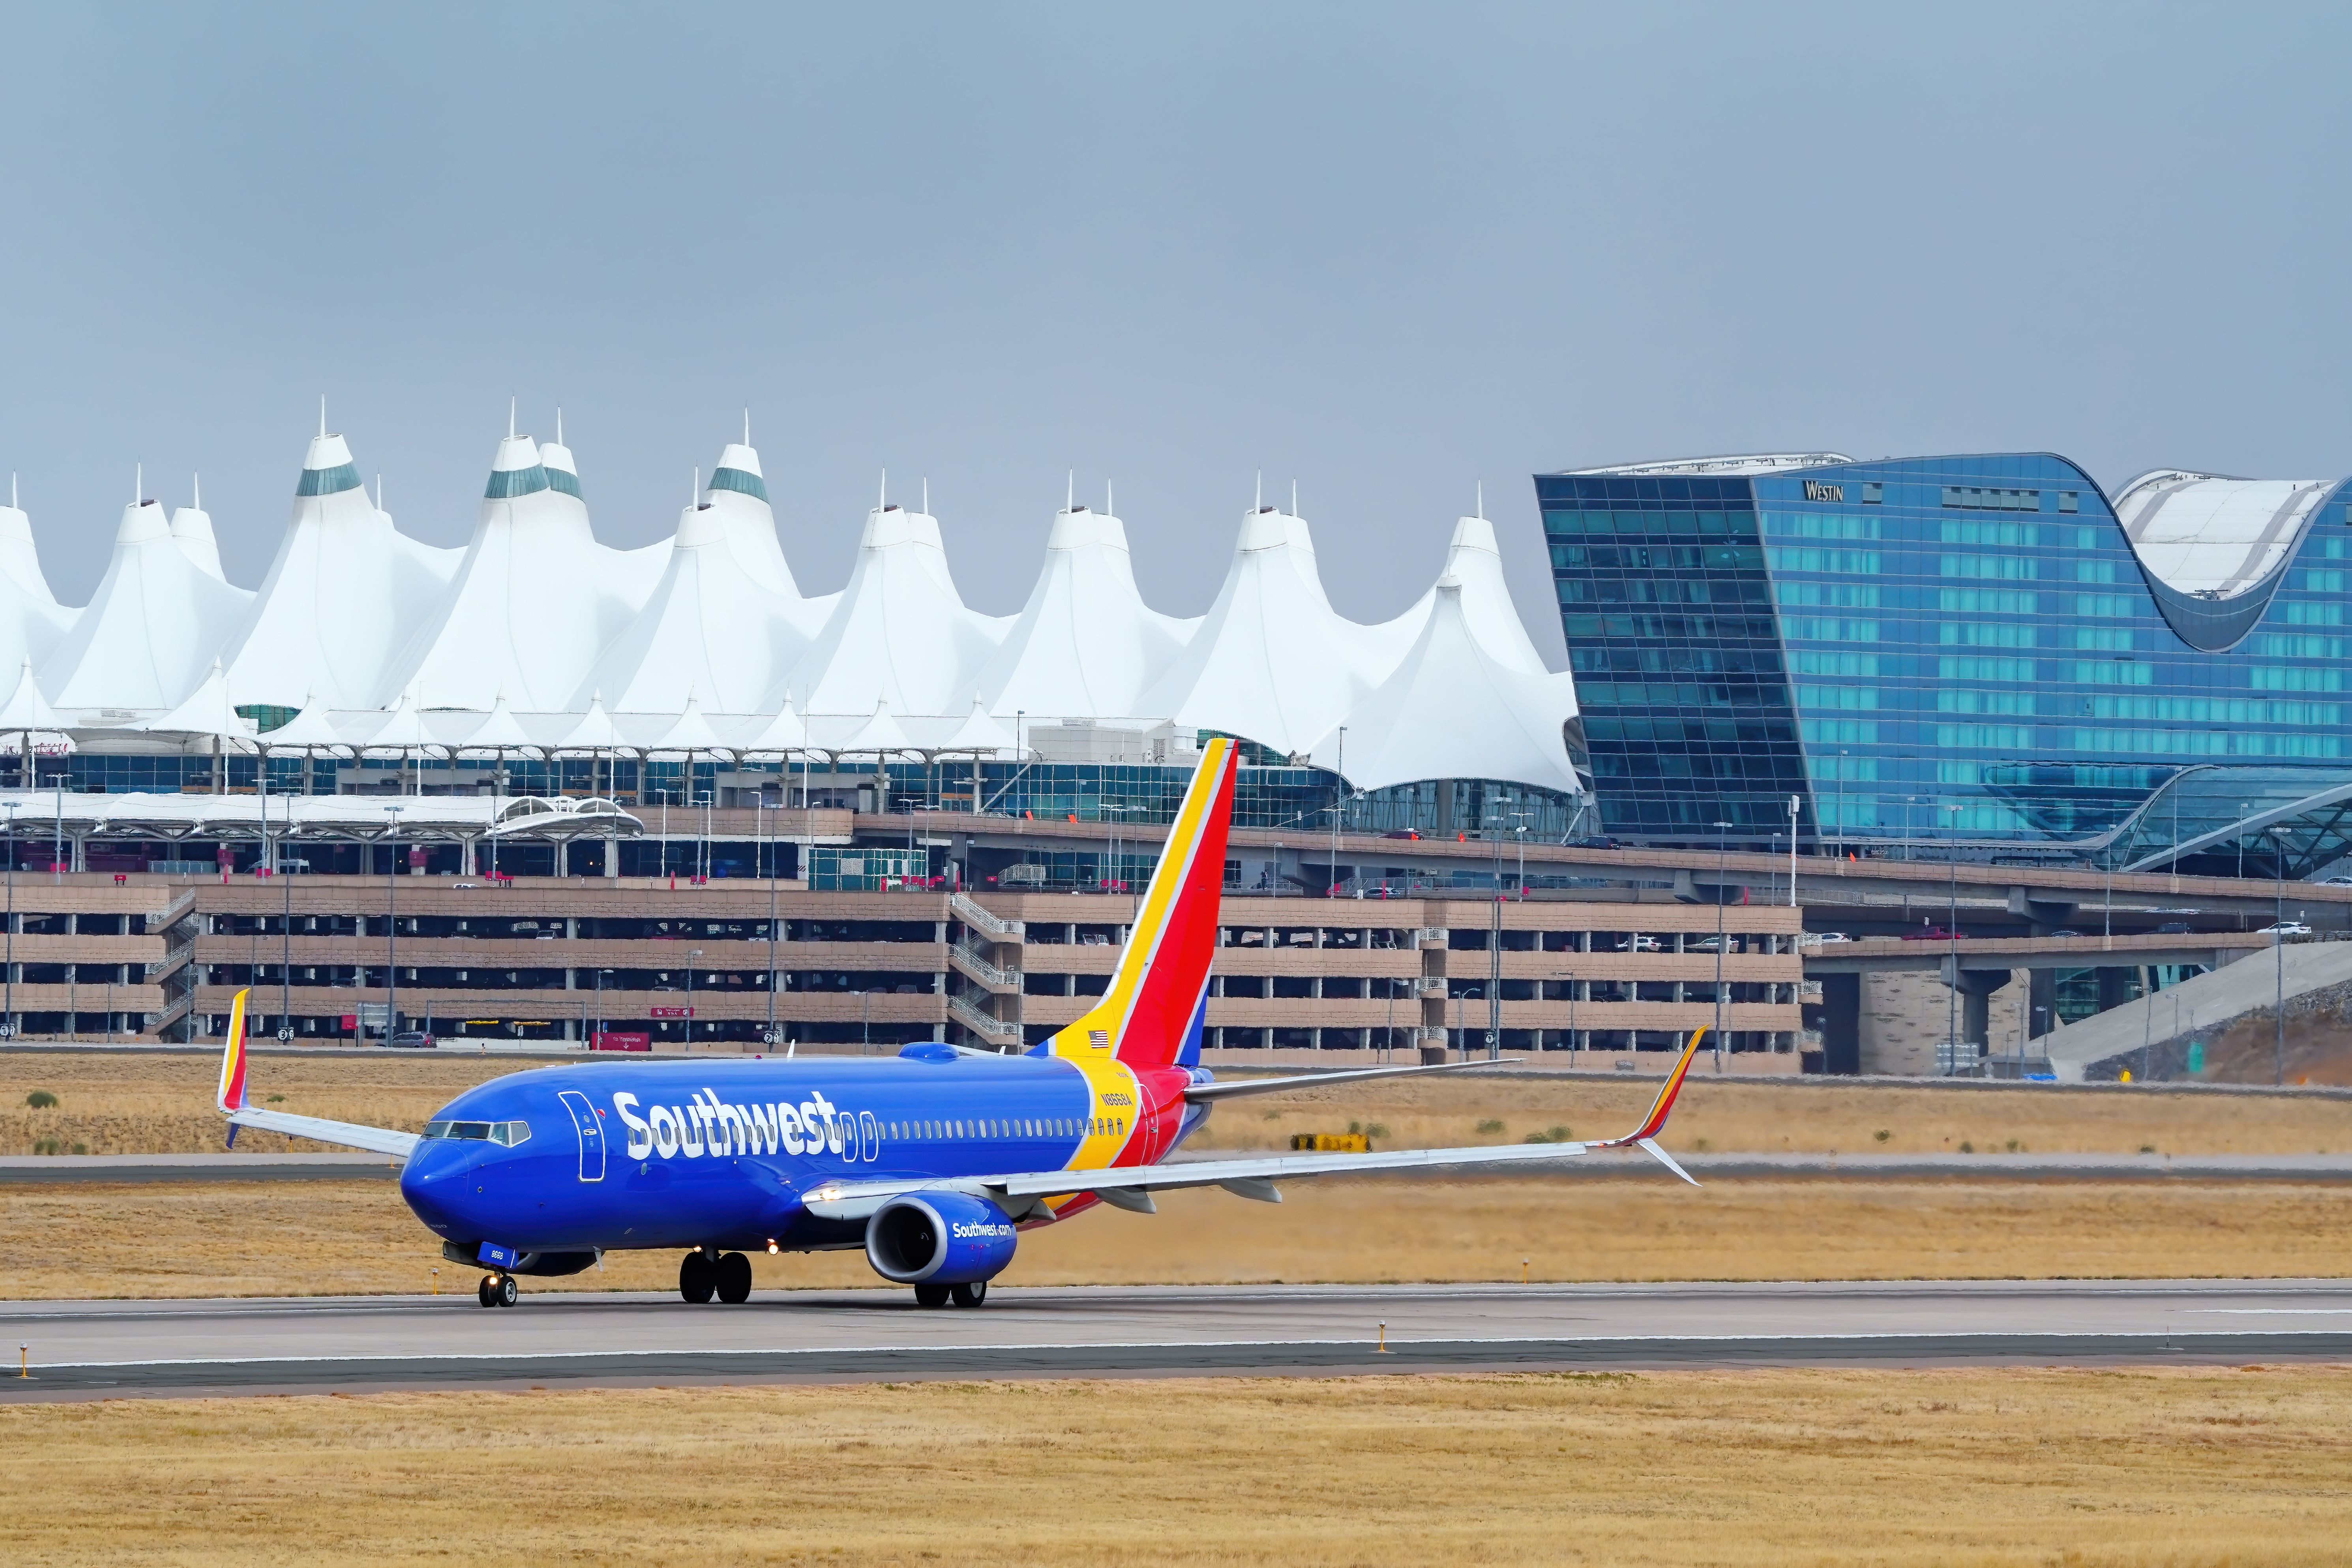 A Southwest Airlines aircraft on the apron at Denver International Airport.